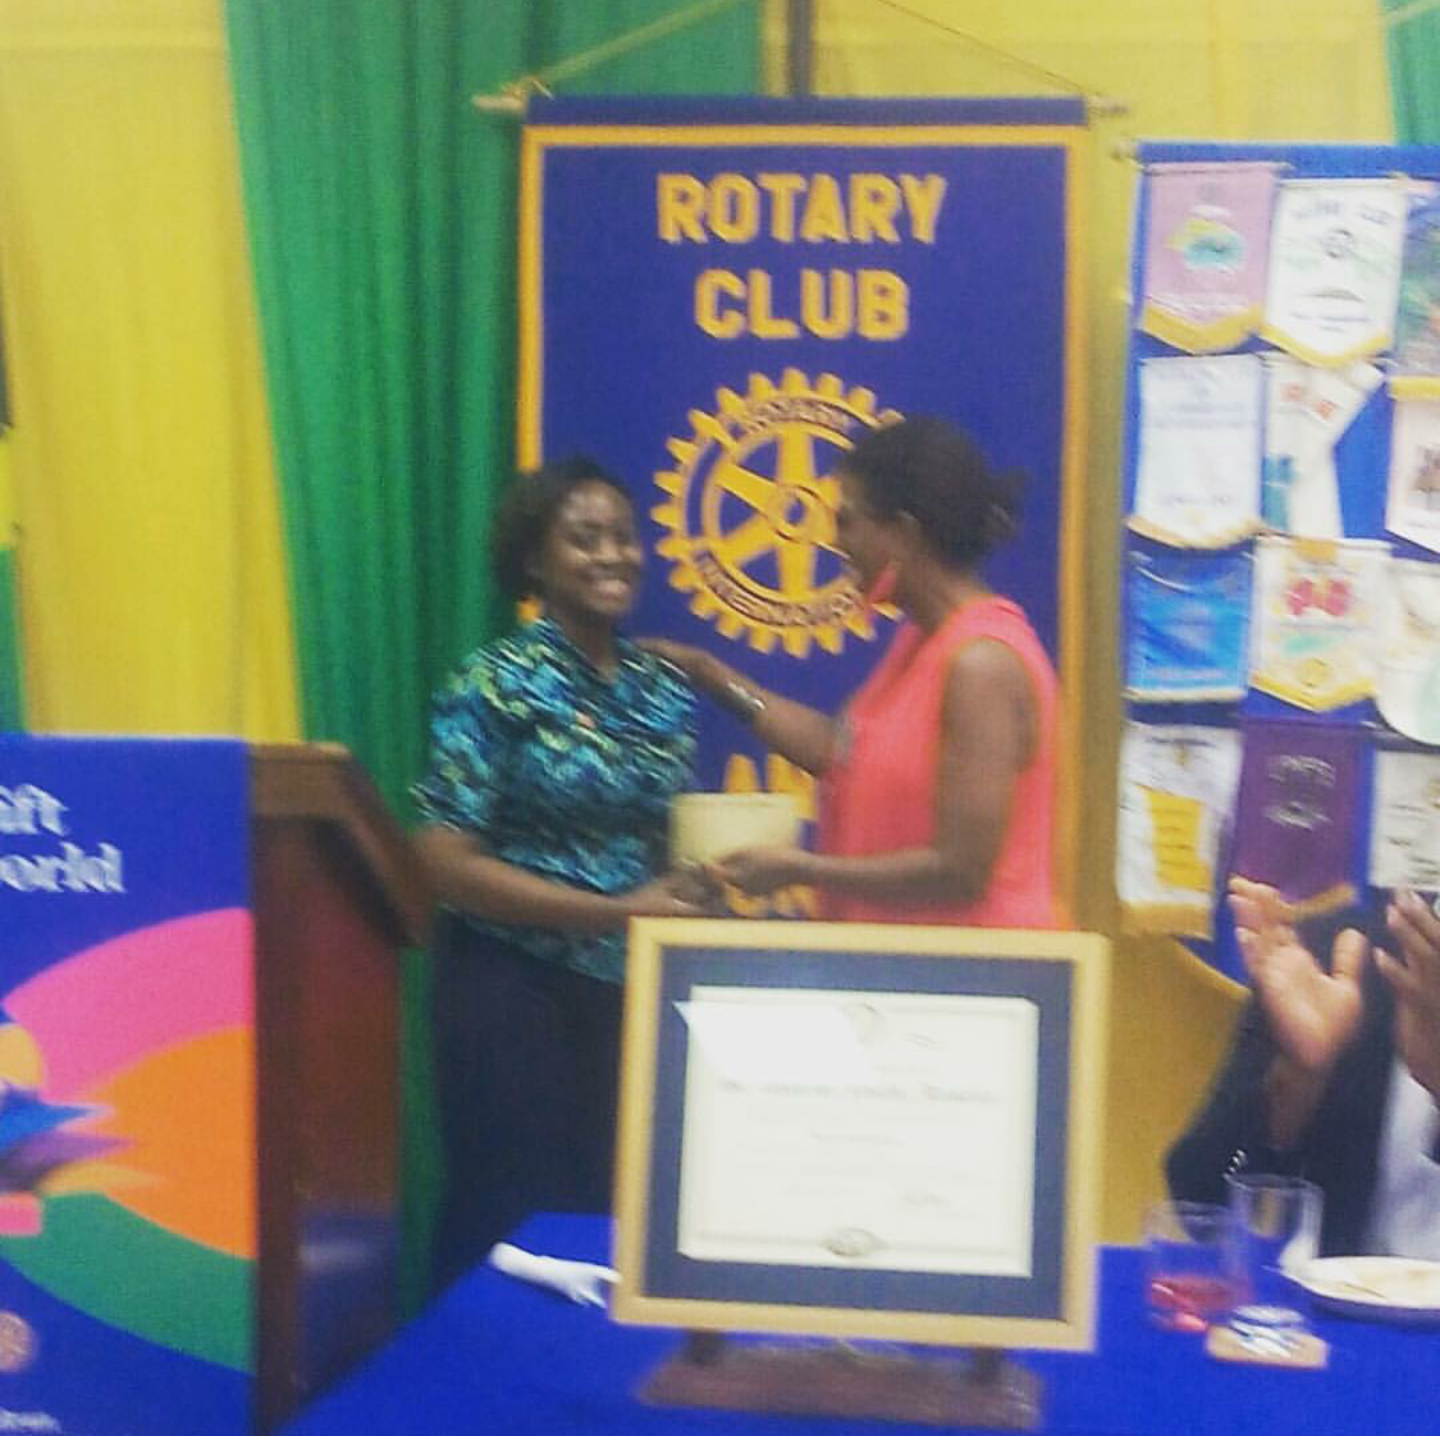 Image: Rotaract Club of St. Andrew's Instagram Page